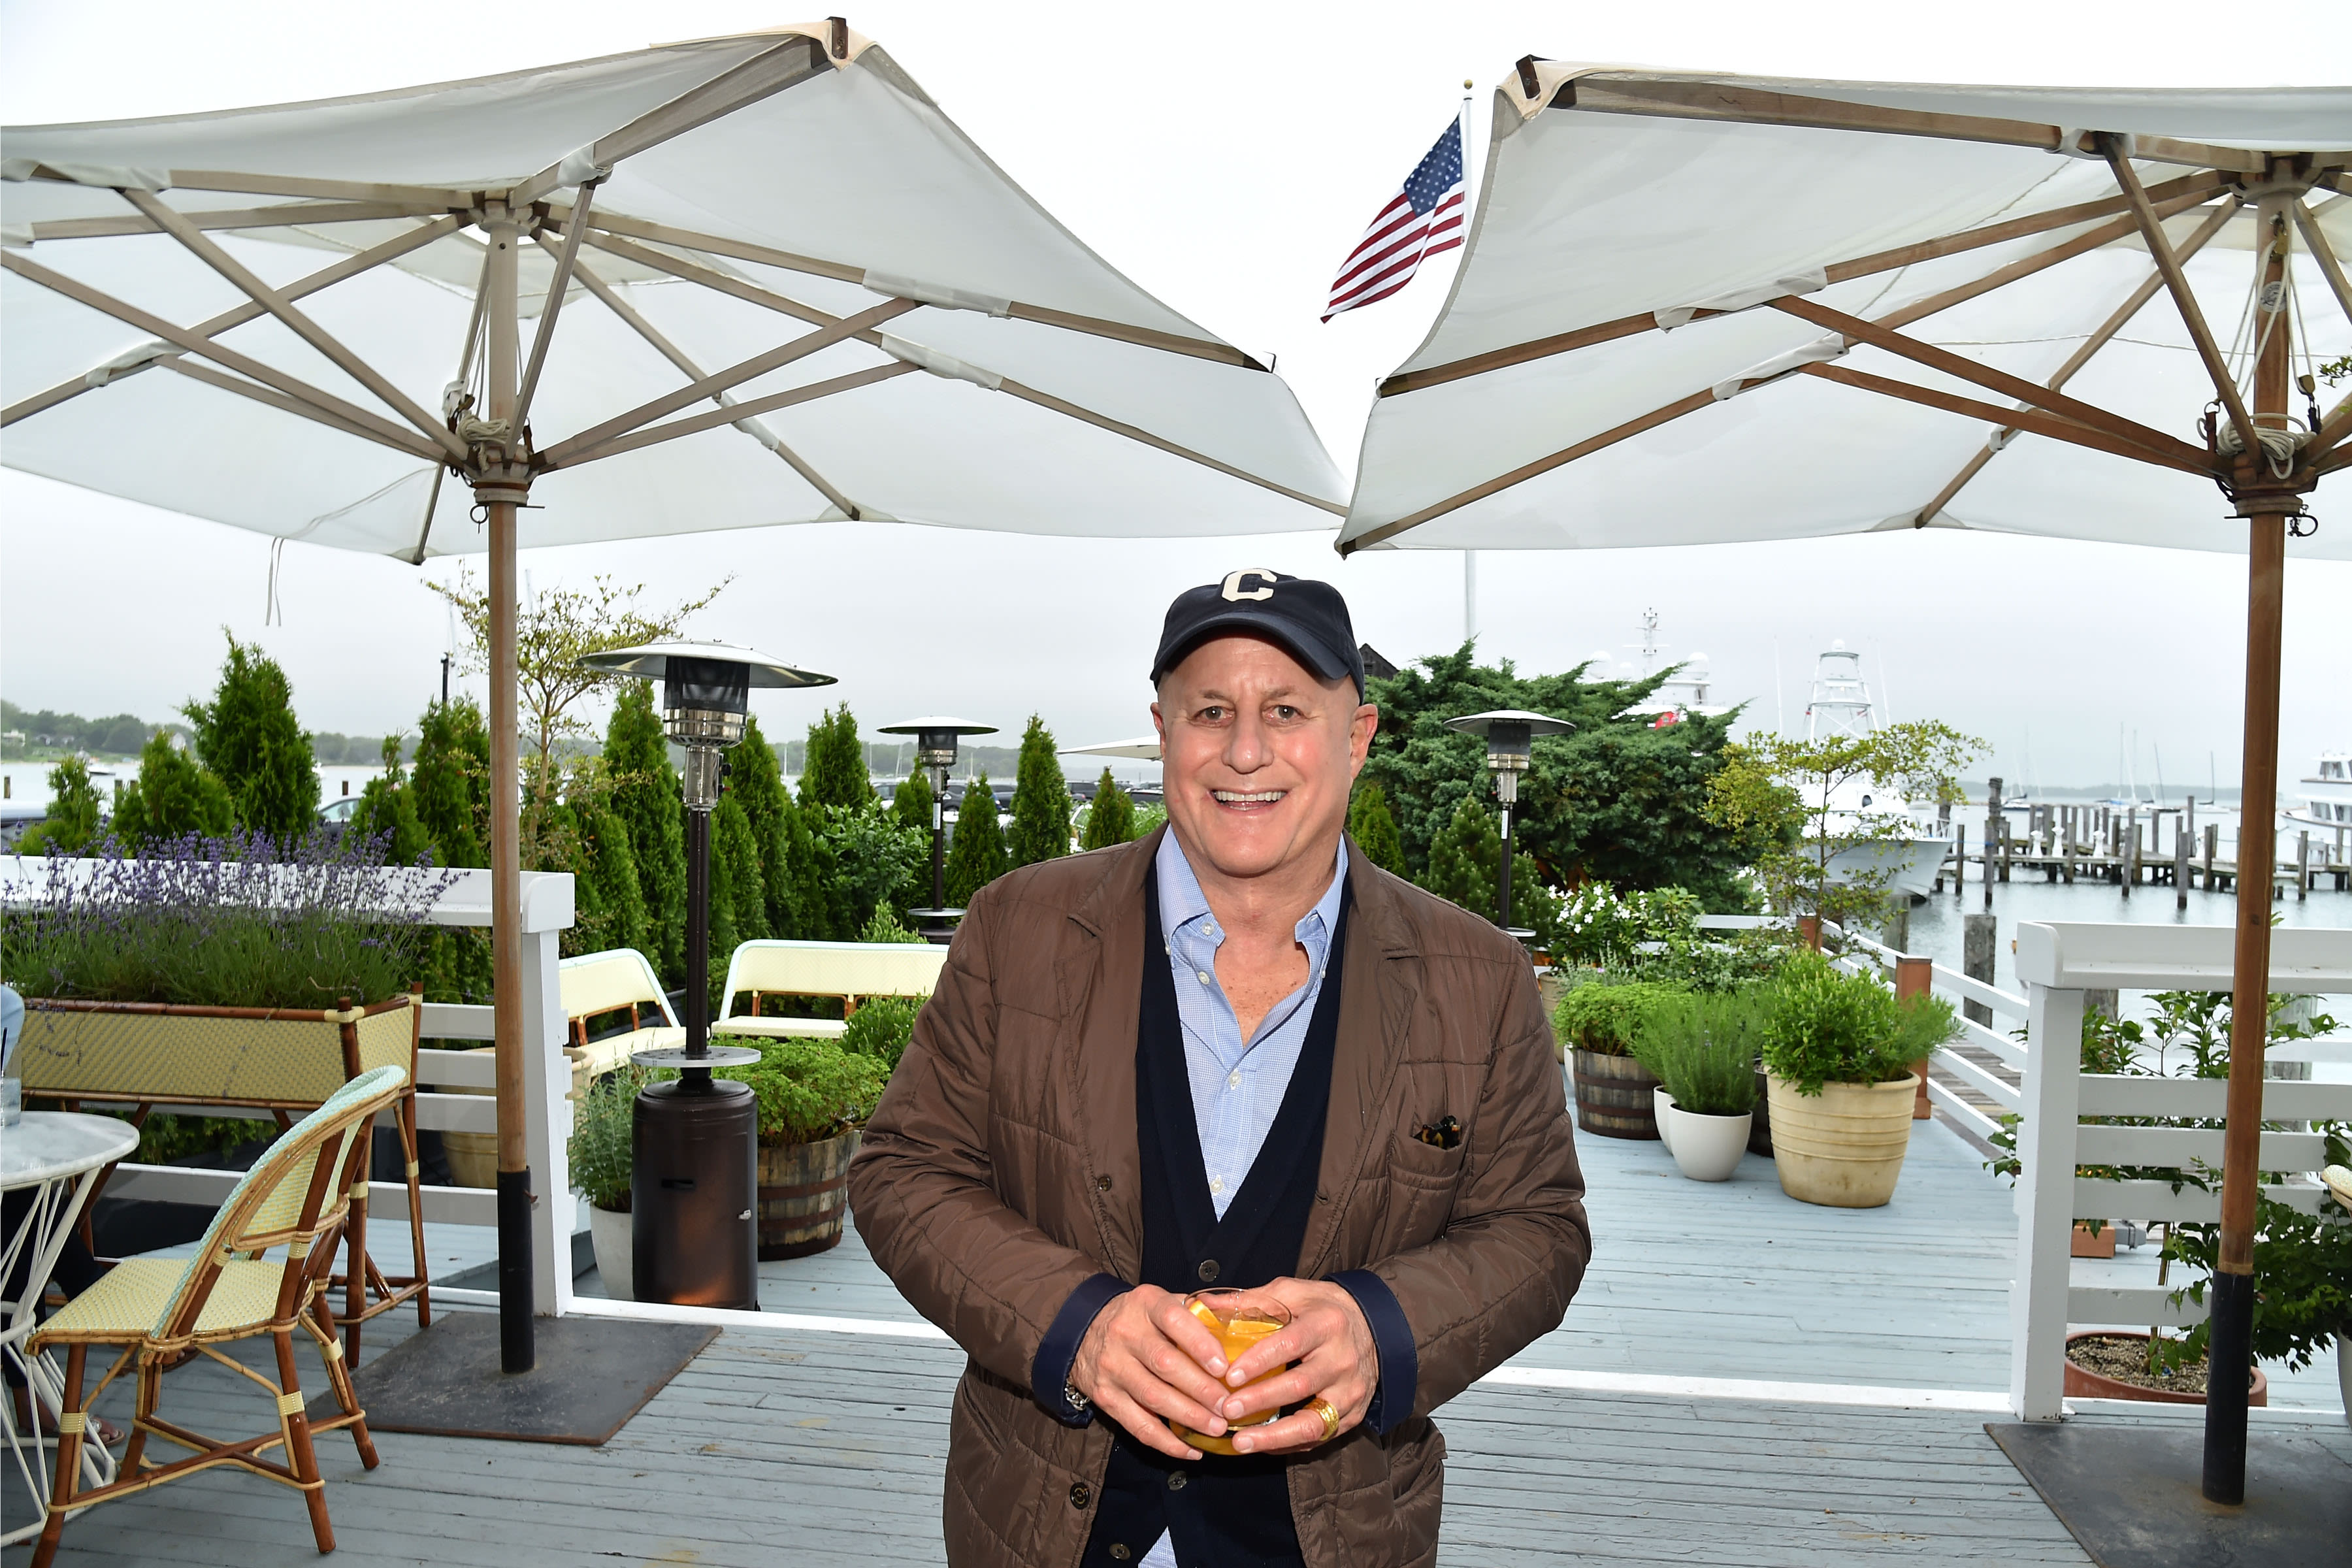 How Mega-Collector Ronald Perelman Offloaded Nearly $1B in Artwork